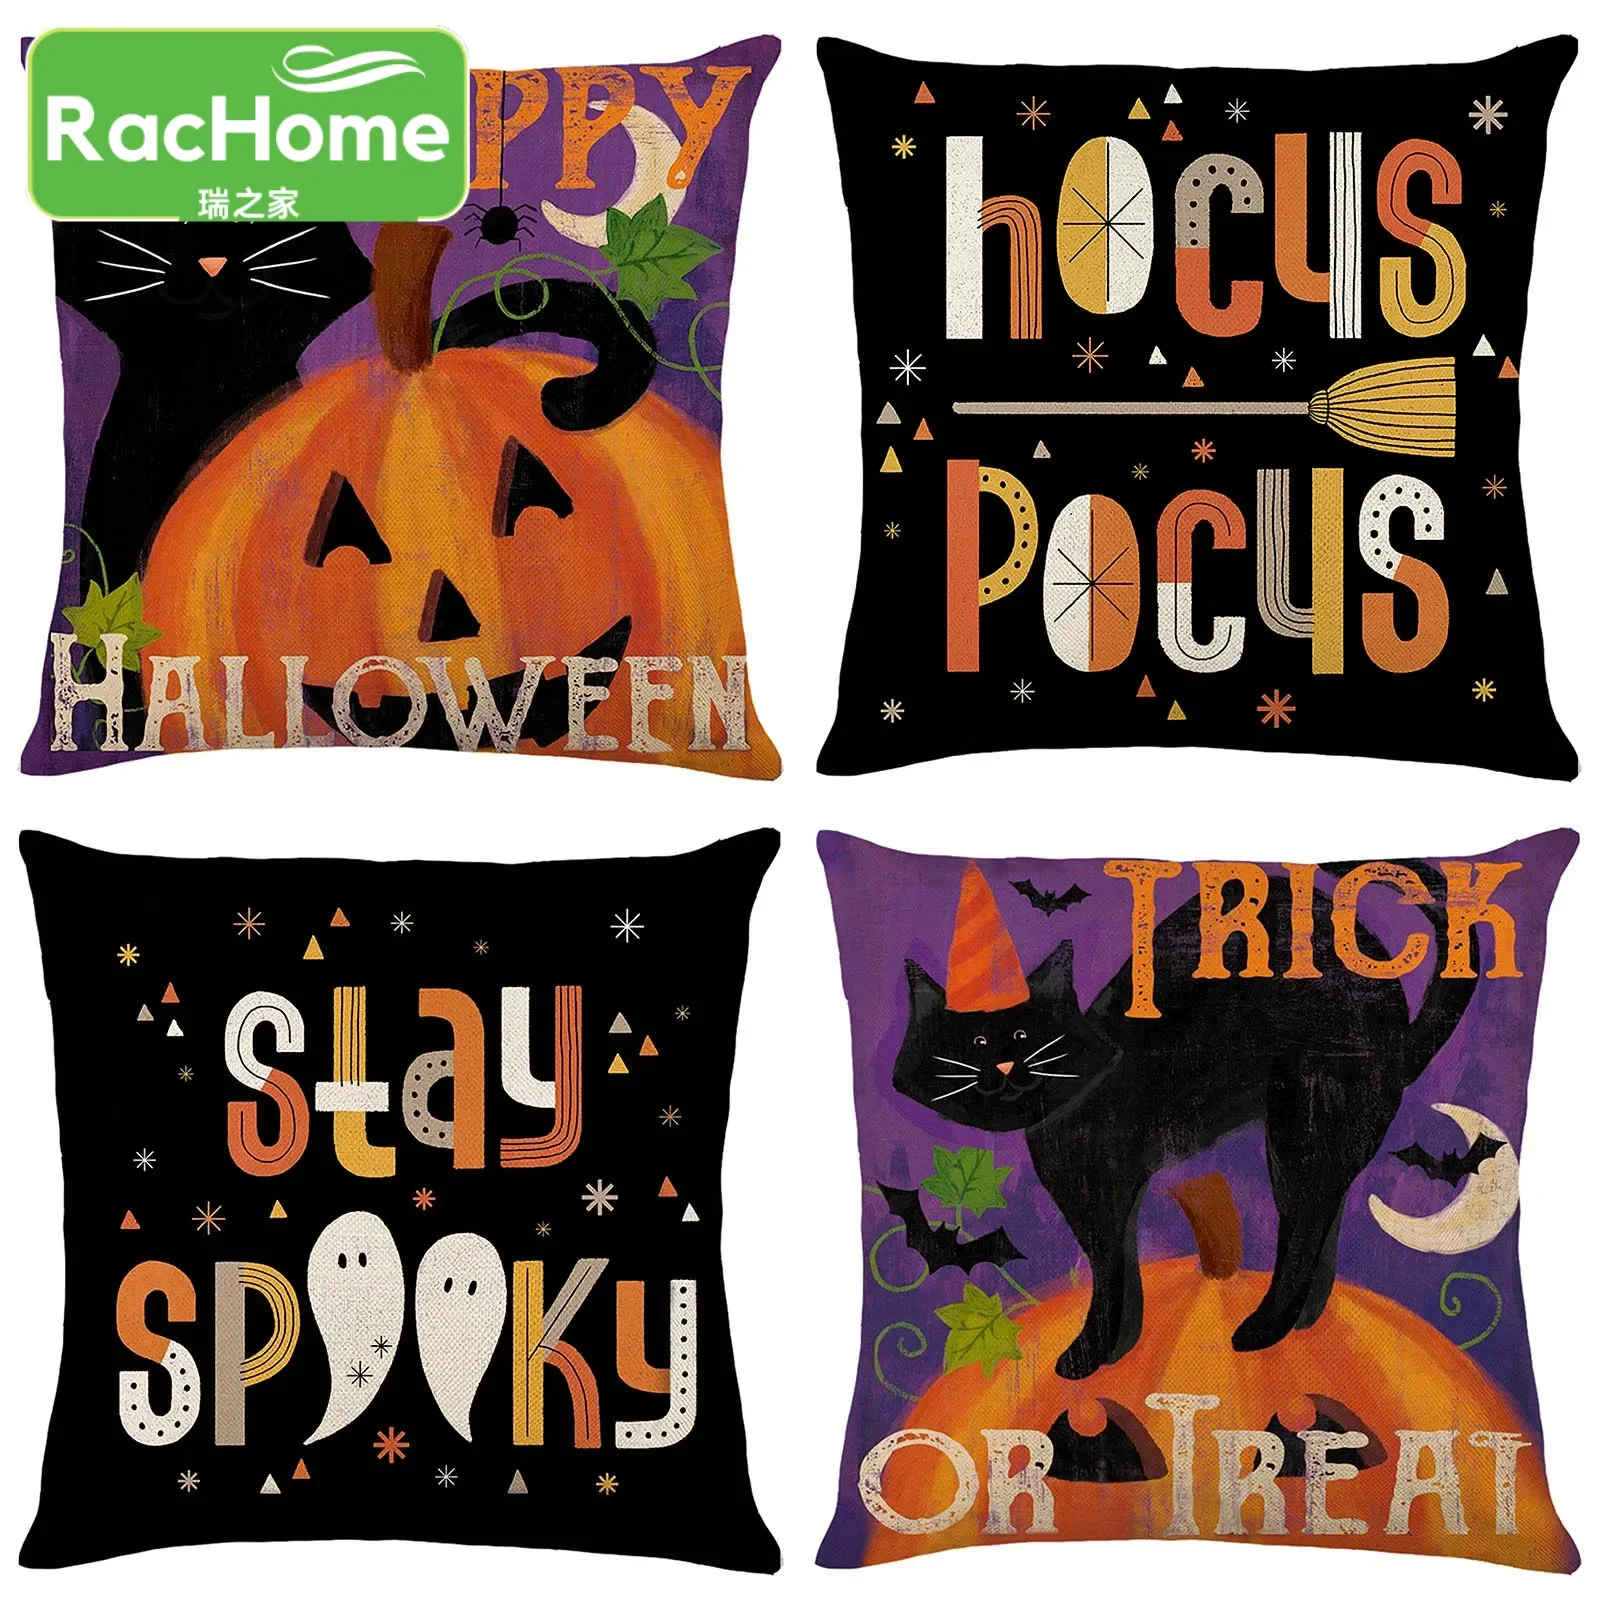 

Happy Halloween Party Cushion Cover Pumpkin Spooky Party Decoration Pillowcase Trick Or Treat Cartoon Home Pillow Case